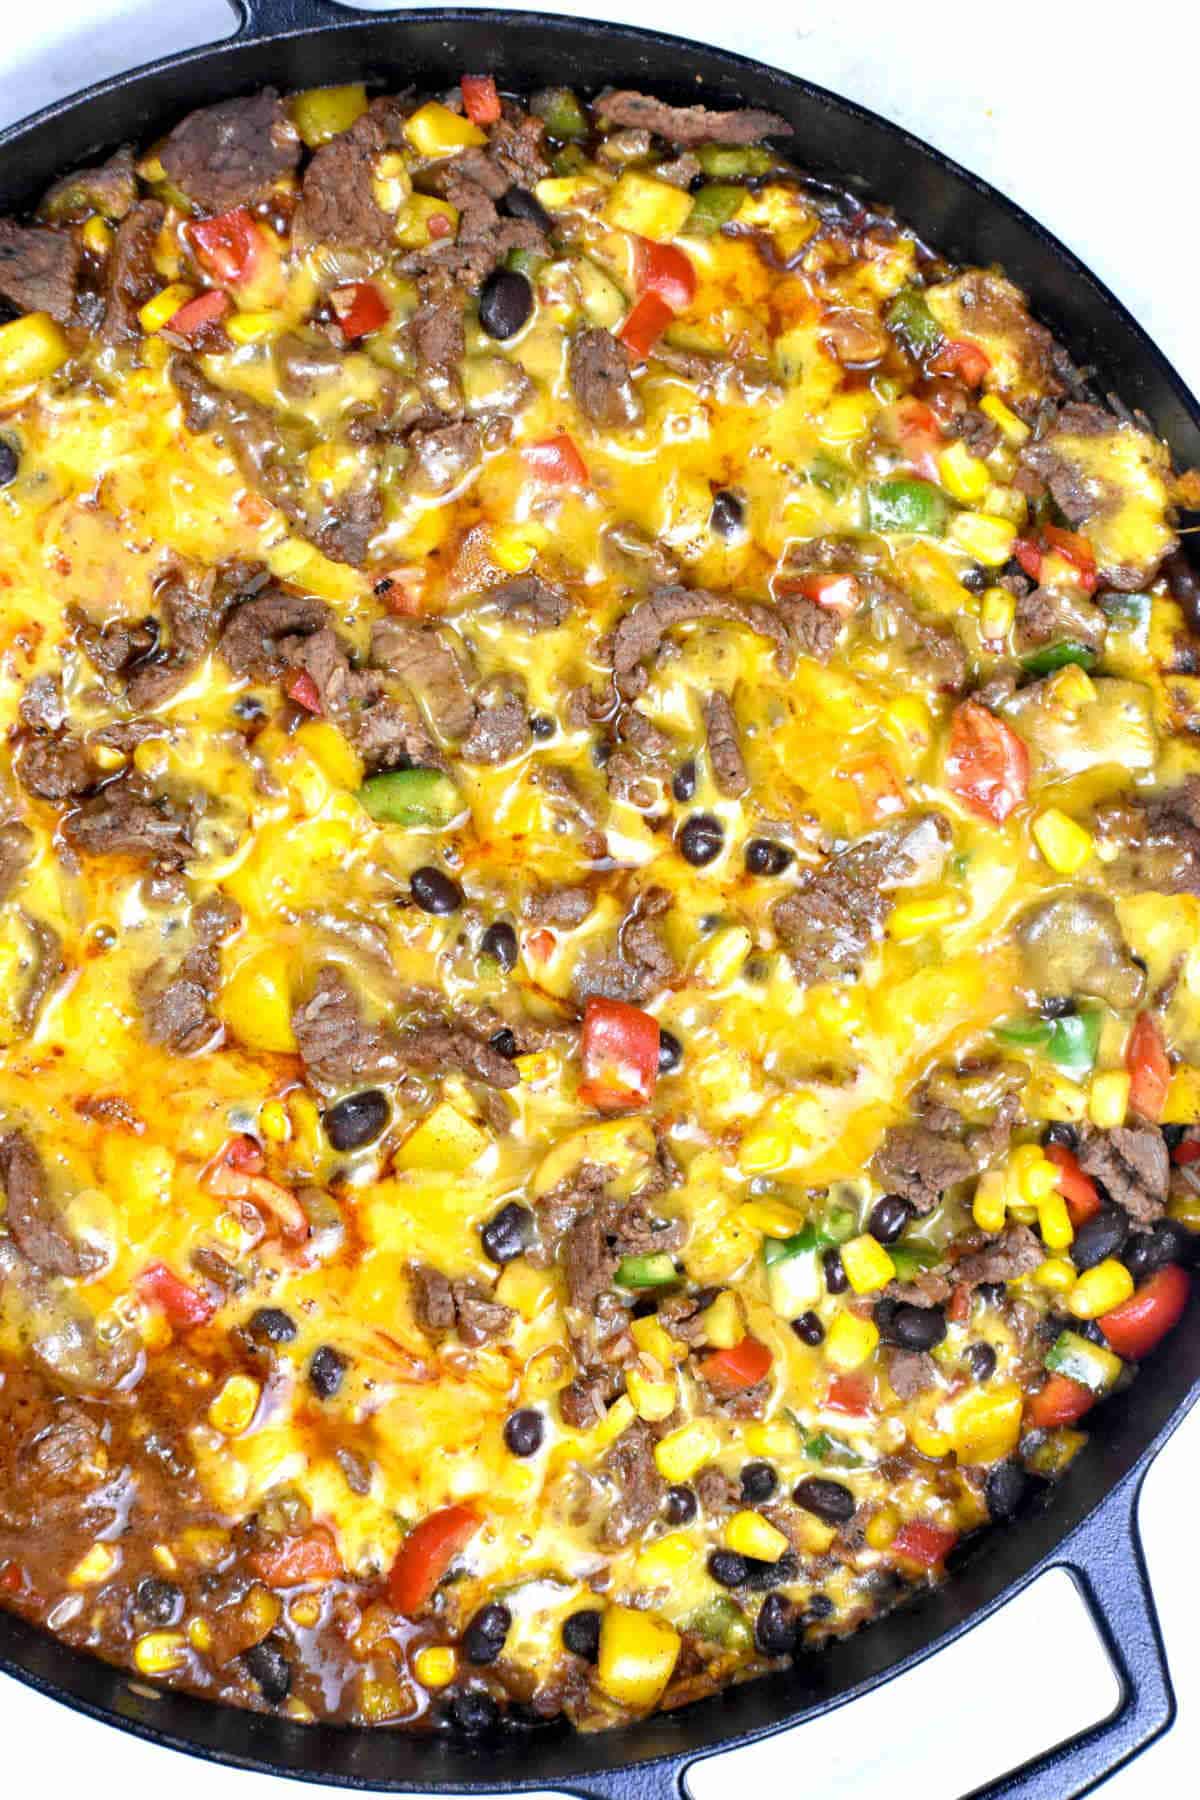 Mexican casserole with melted cheese on top in a skillet.